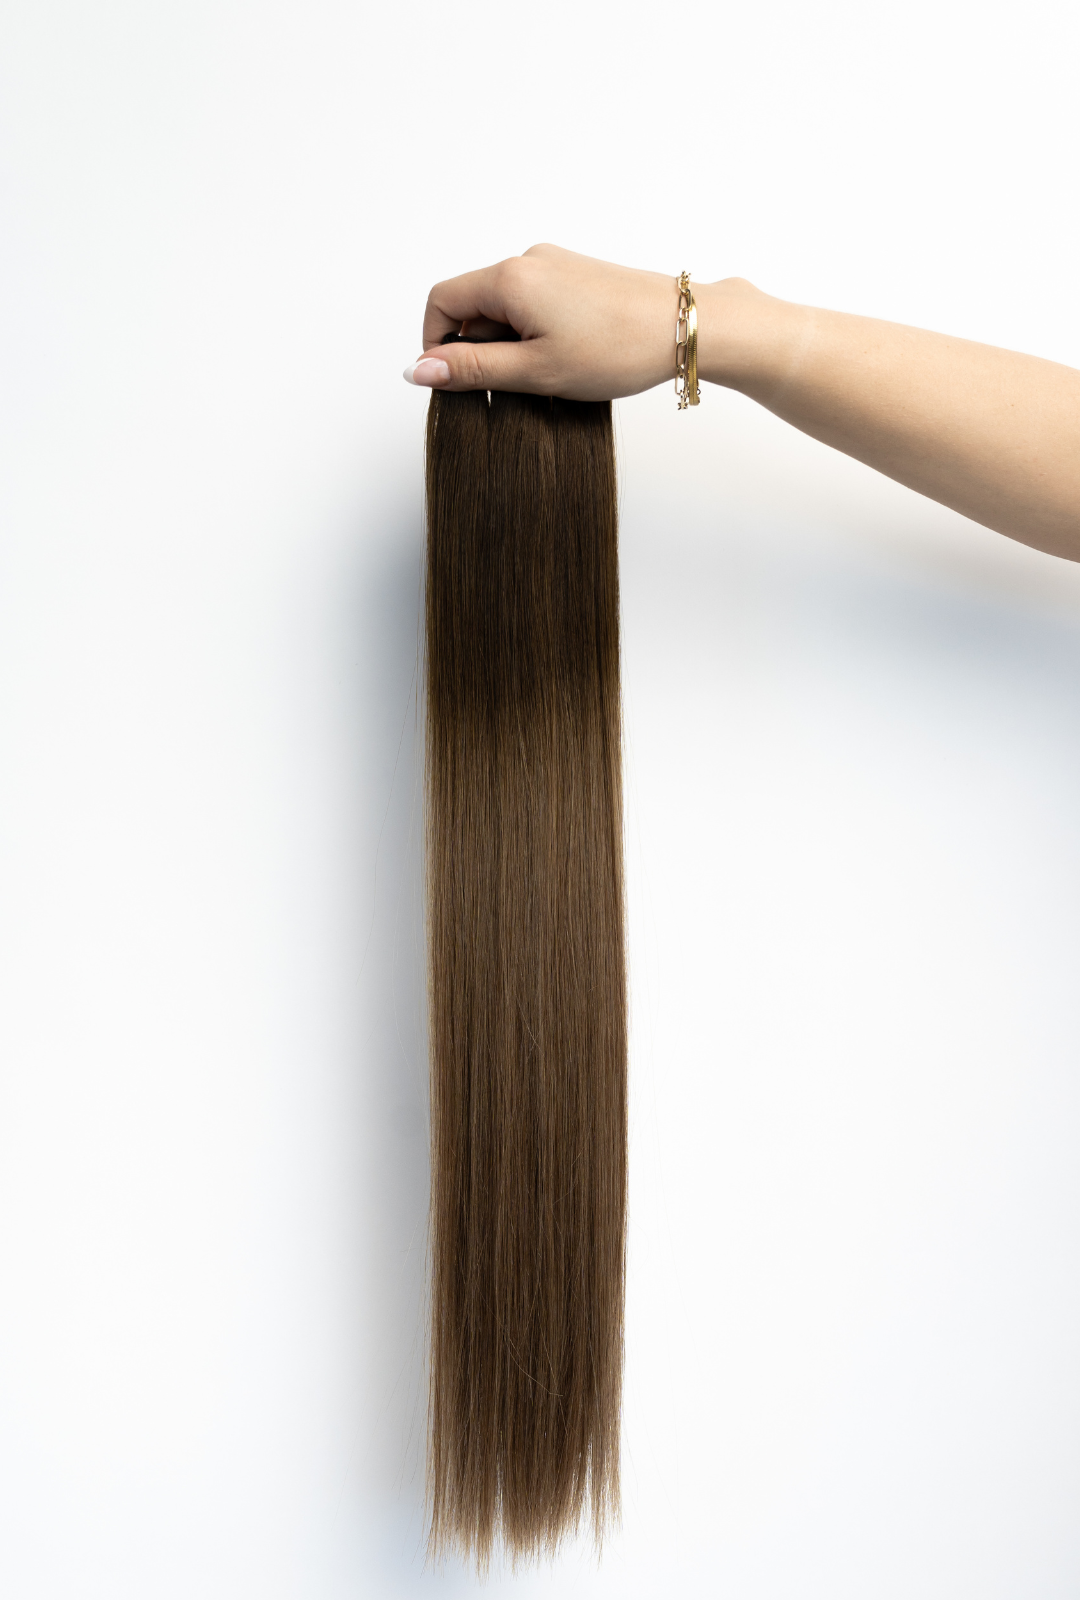 Laced Hair Machine Sewn Weft Extensions Ombré #3/8